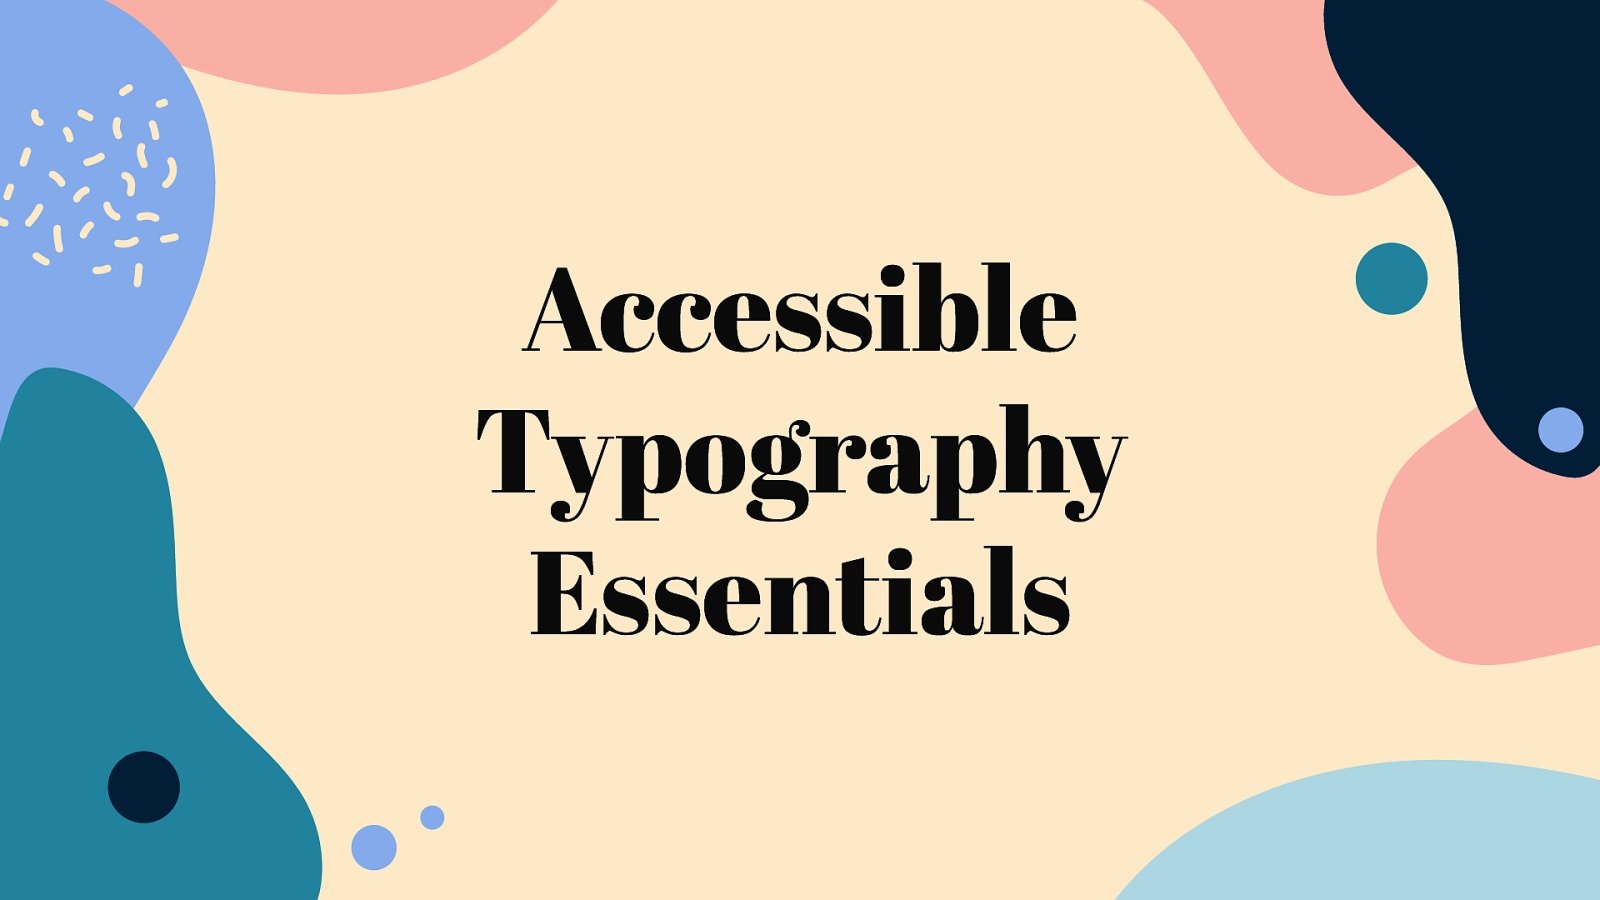 Accessible Typography Essentials